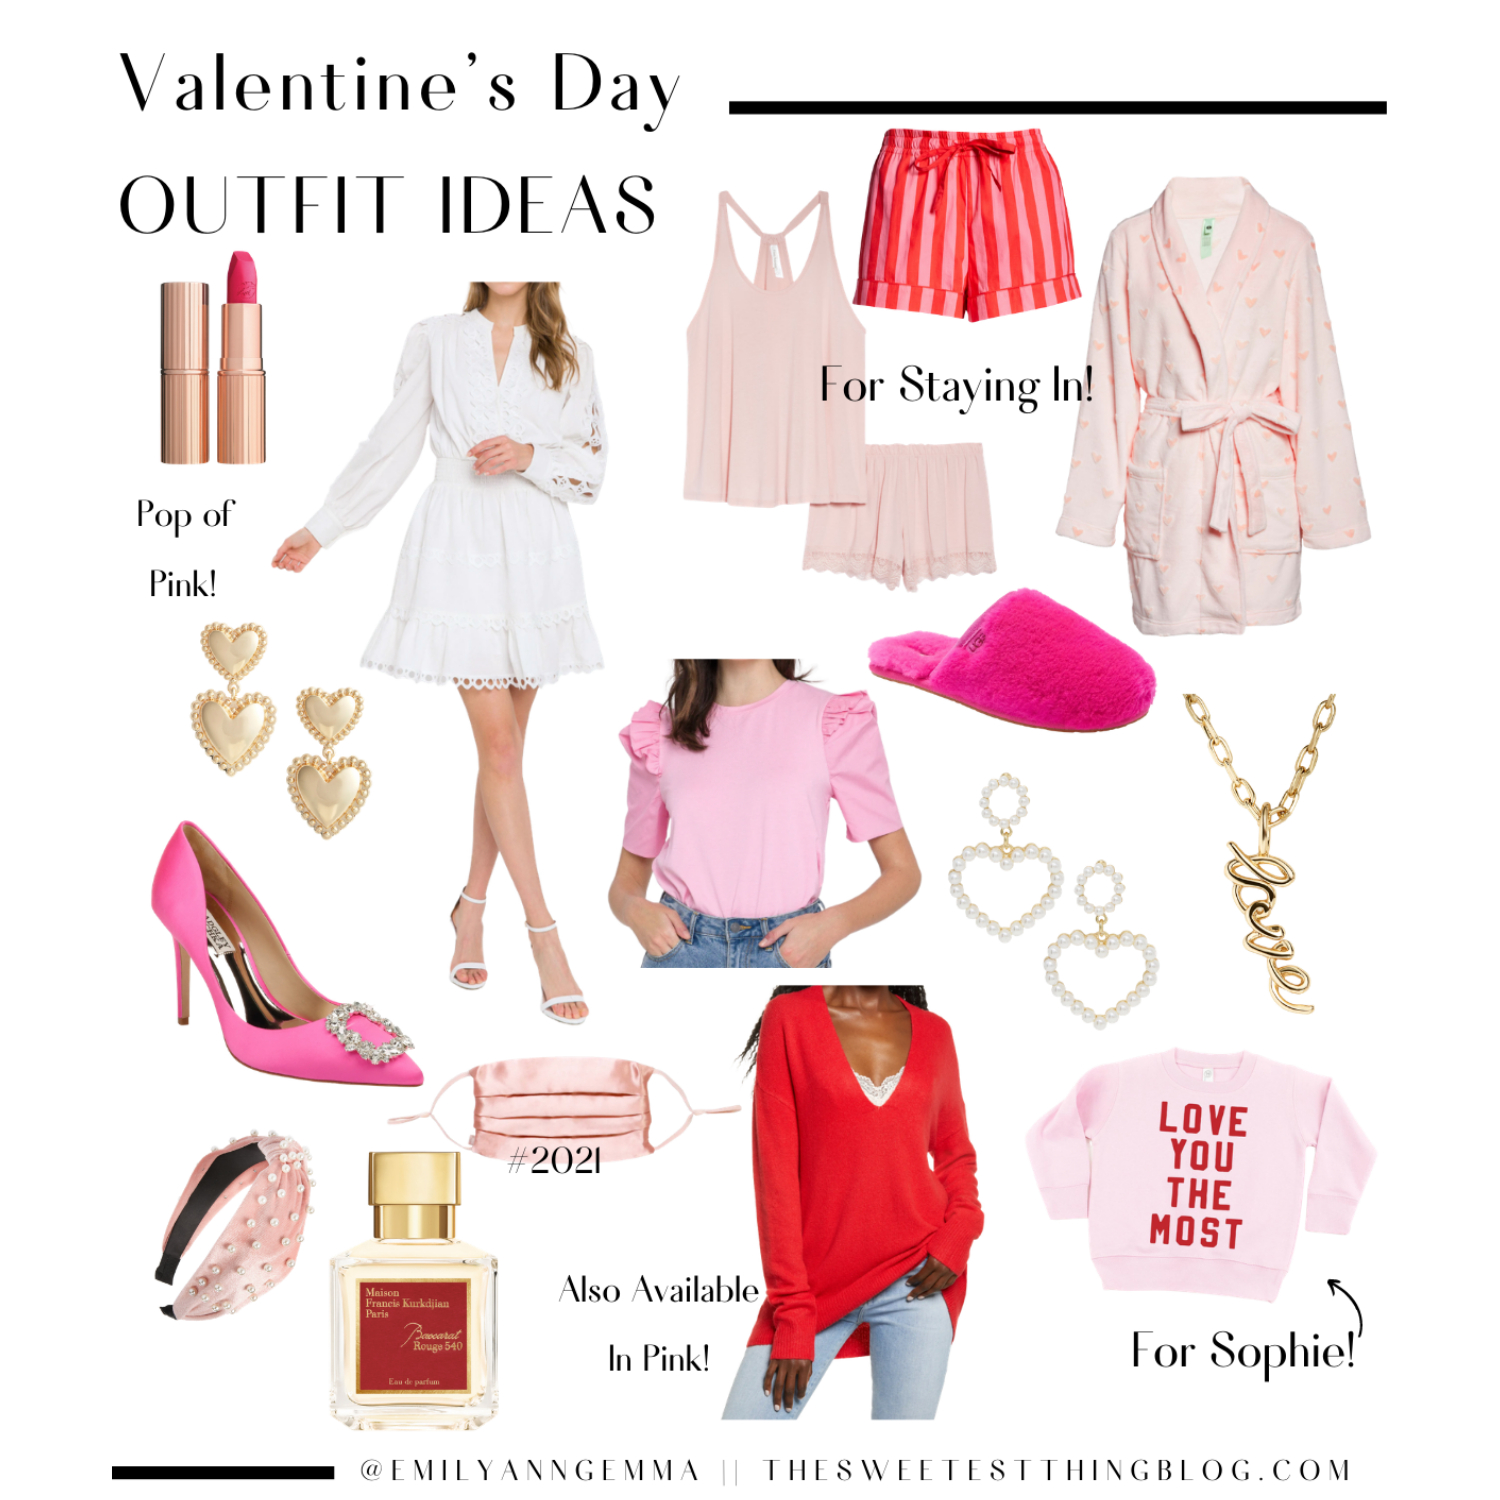 Valentine's Day Outfit Ideas by popular US fashion blog, The Sweetest Thing: collage image of a Charlotte Tilbury Hot Lips Lipstick in Electric Peony, Endless Rose White Lace Dress, Pink Lace Pajama Set, Pink and Red Striped Pajama Shorts, Plush Heart Robe, Gold Heart Earrings, Pink Puff Sleeved Tee Shirt, Pink Fuzzy Slippers, Pearl Heart Earrings, 'Love' Gold Chain Necklace, Pink Pumps, Pearl & Pink Headband, Pink Silk Face Mask, V-Neck Sweater, Love You The Most' Sweatshirt [for Sophie]  #16. Baccarat Rouge Perfume.